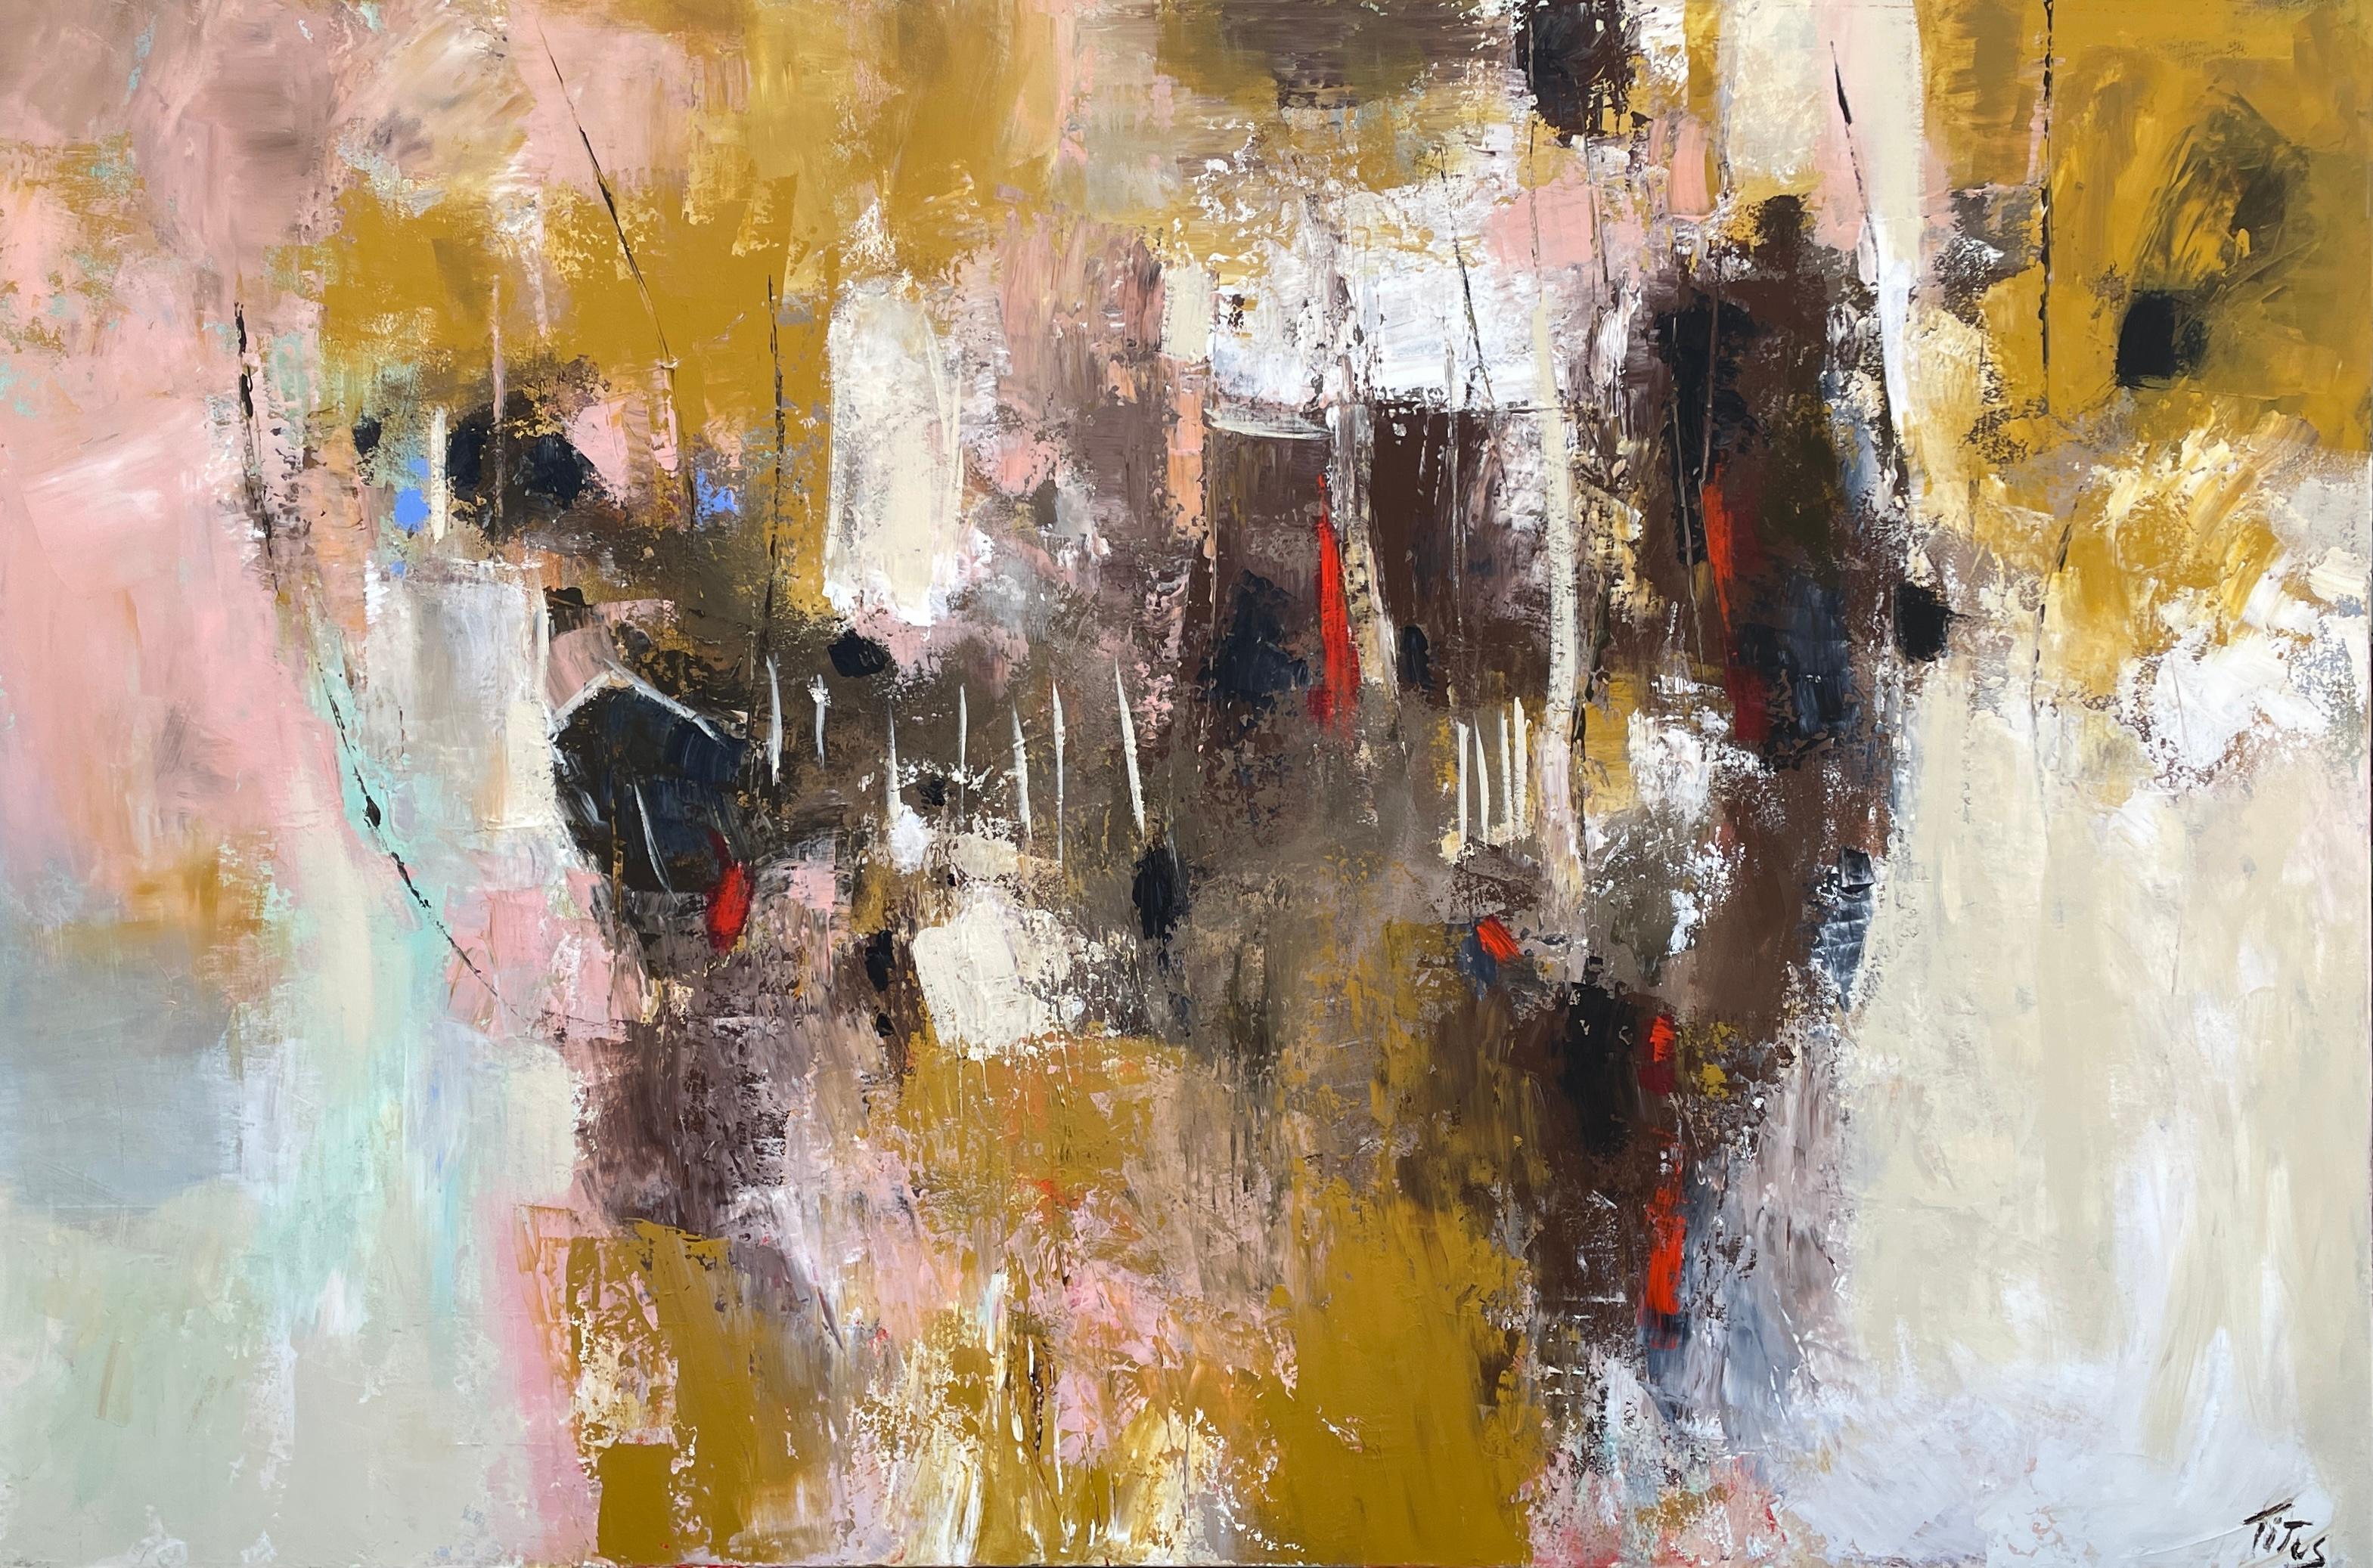 "Marketplace" by Mary Titus is a captivating piece of abstract expressionism that showcases the artist's command of acrylics on a grand 48" x 72" canvas. Titus orchestrates a symphony of earthy tones and pastel shades, weaving a narrative that